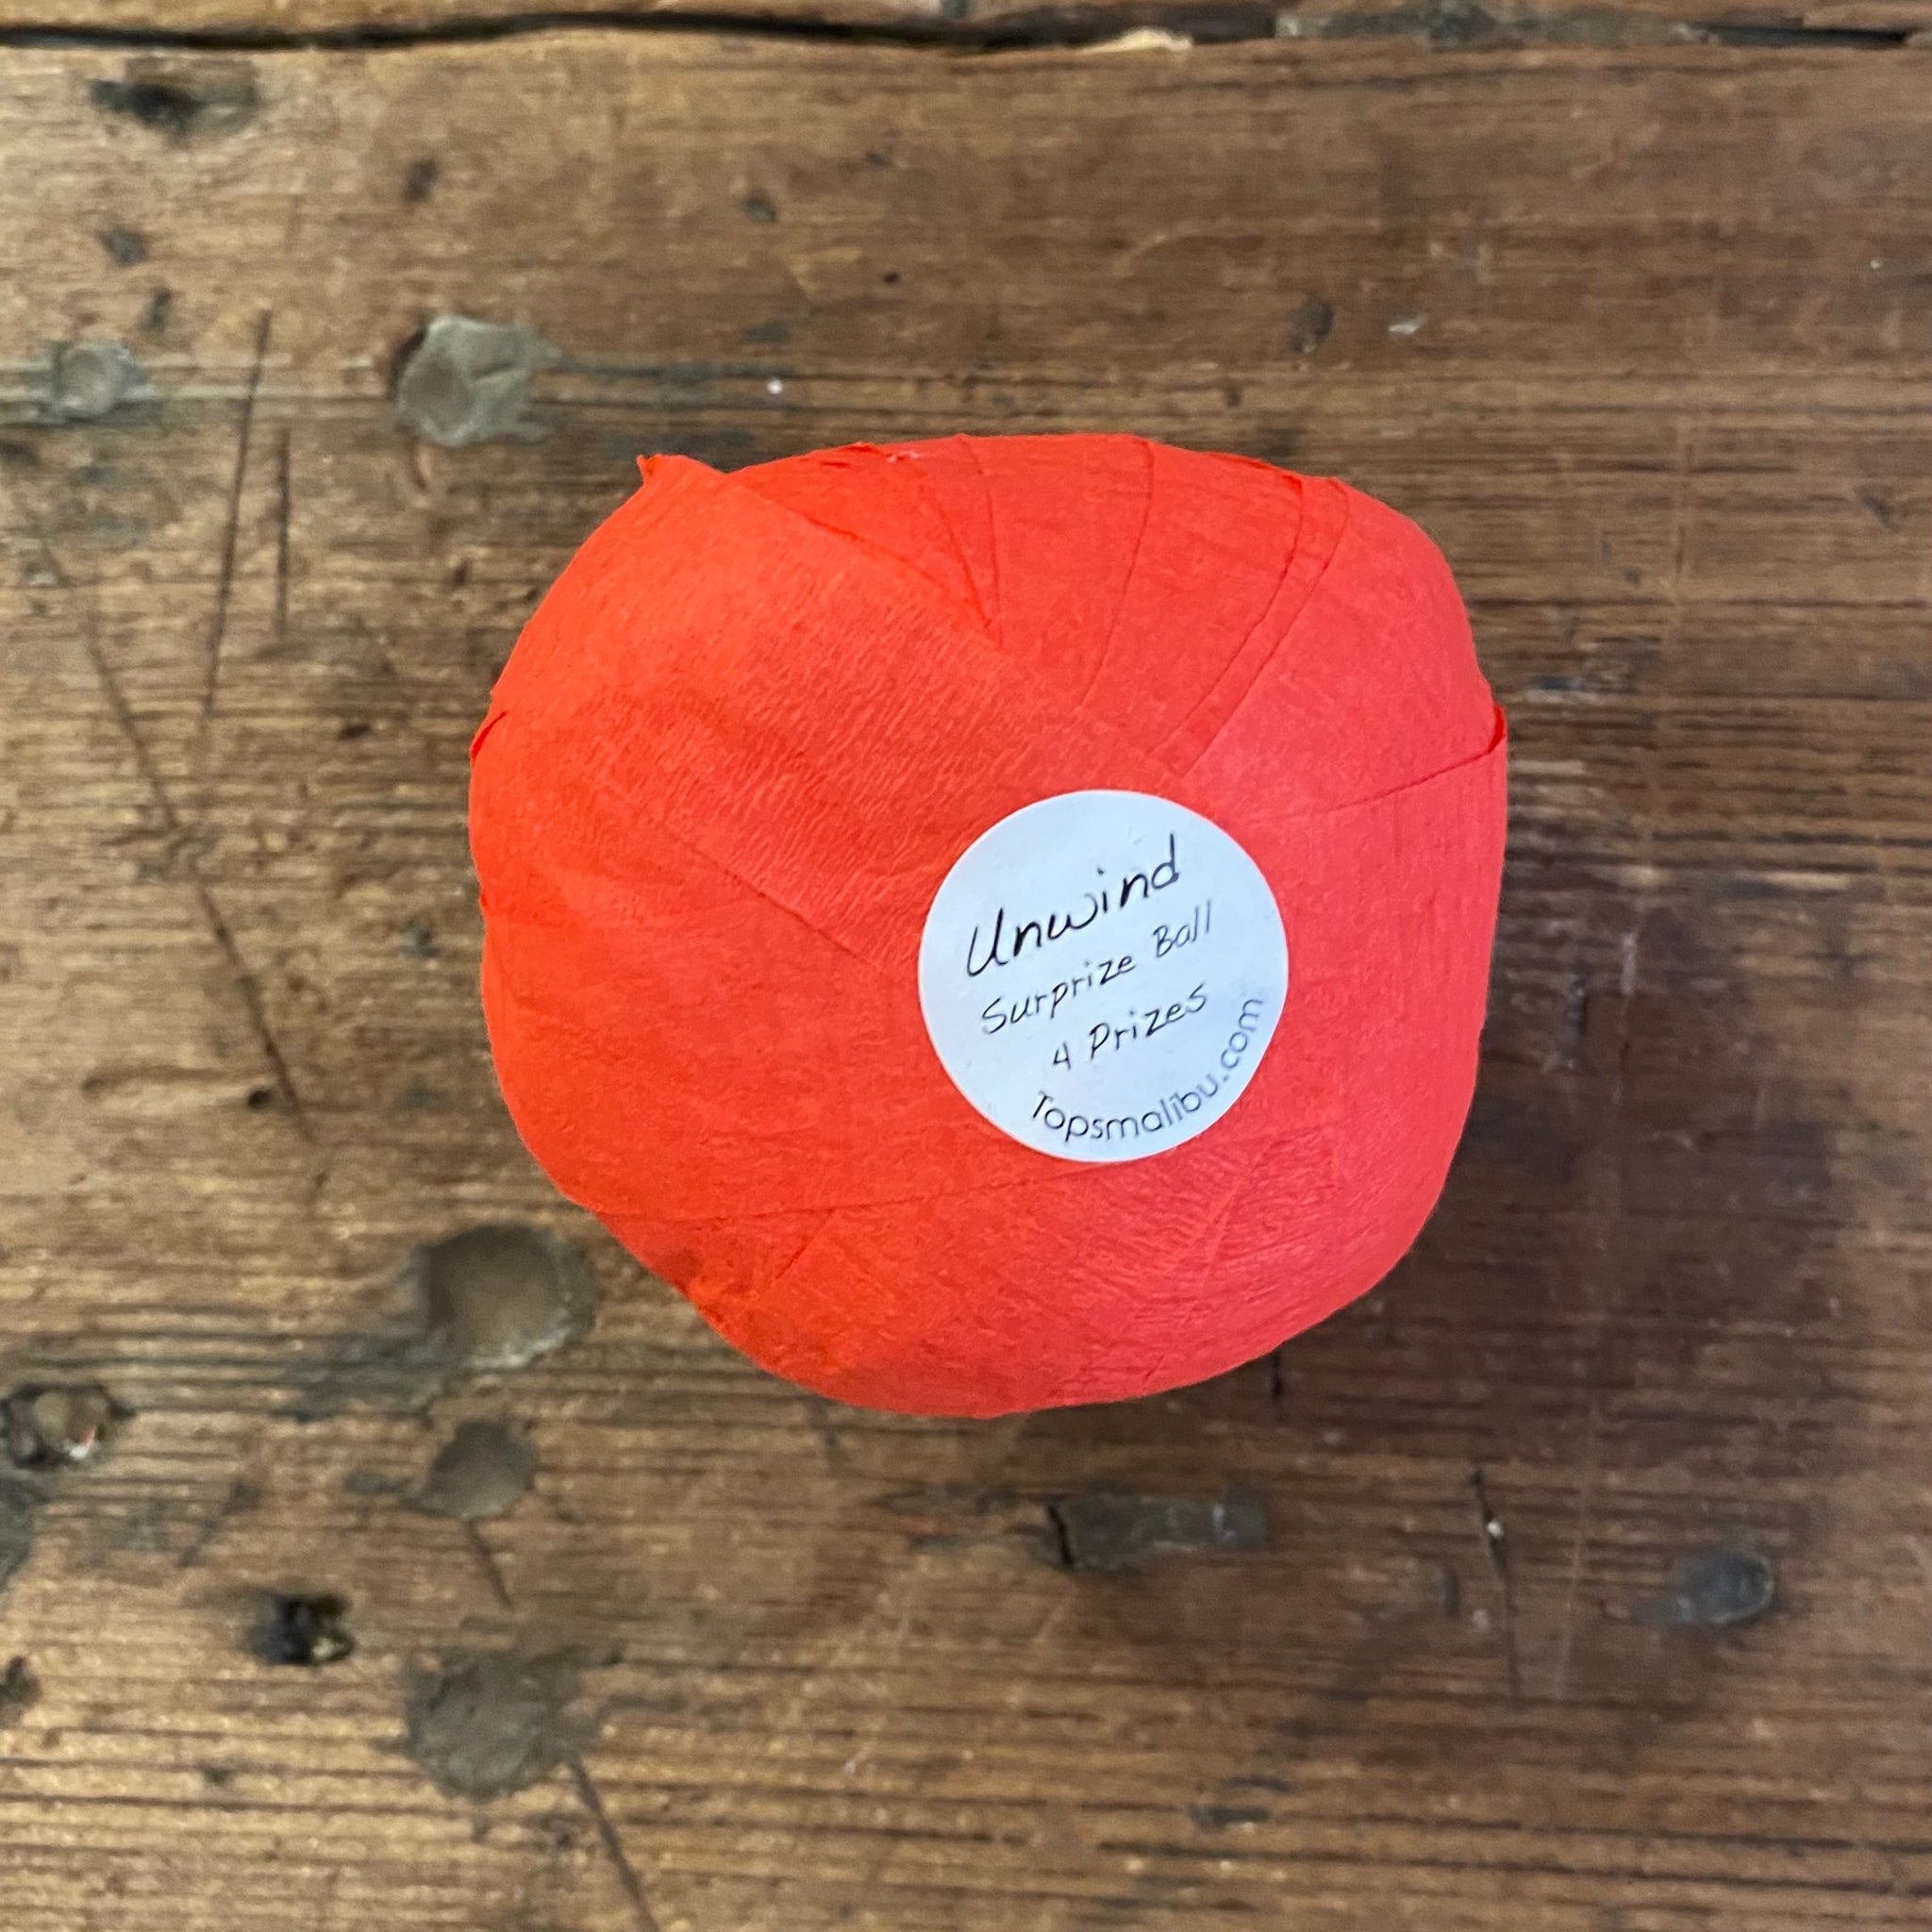 sticker on bottom of red surprize balls that say "unwind! Surprize ball 4 fun prizes